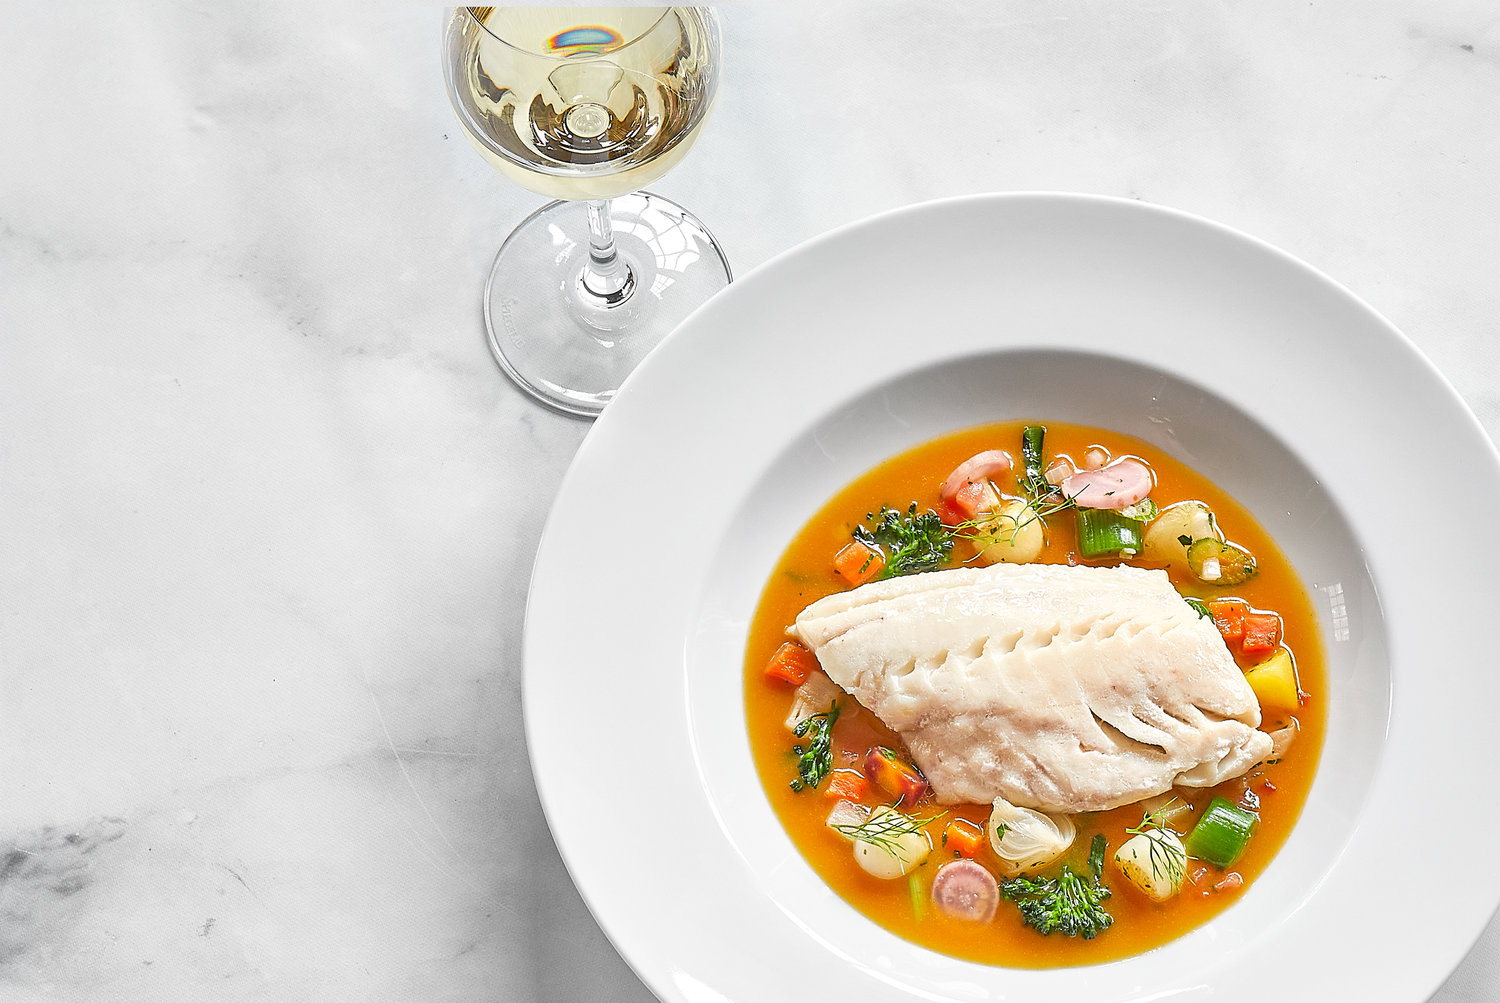 Entrees rotate regularly, but expect elevated seafood options like Black Bass